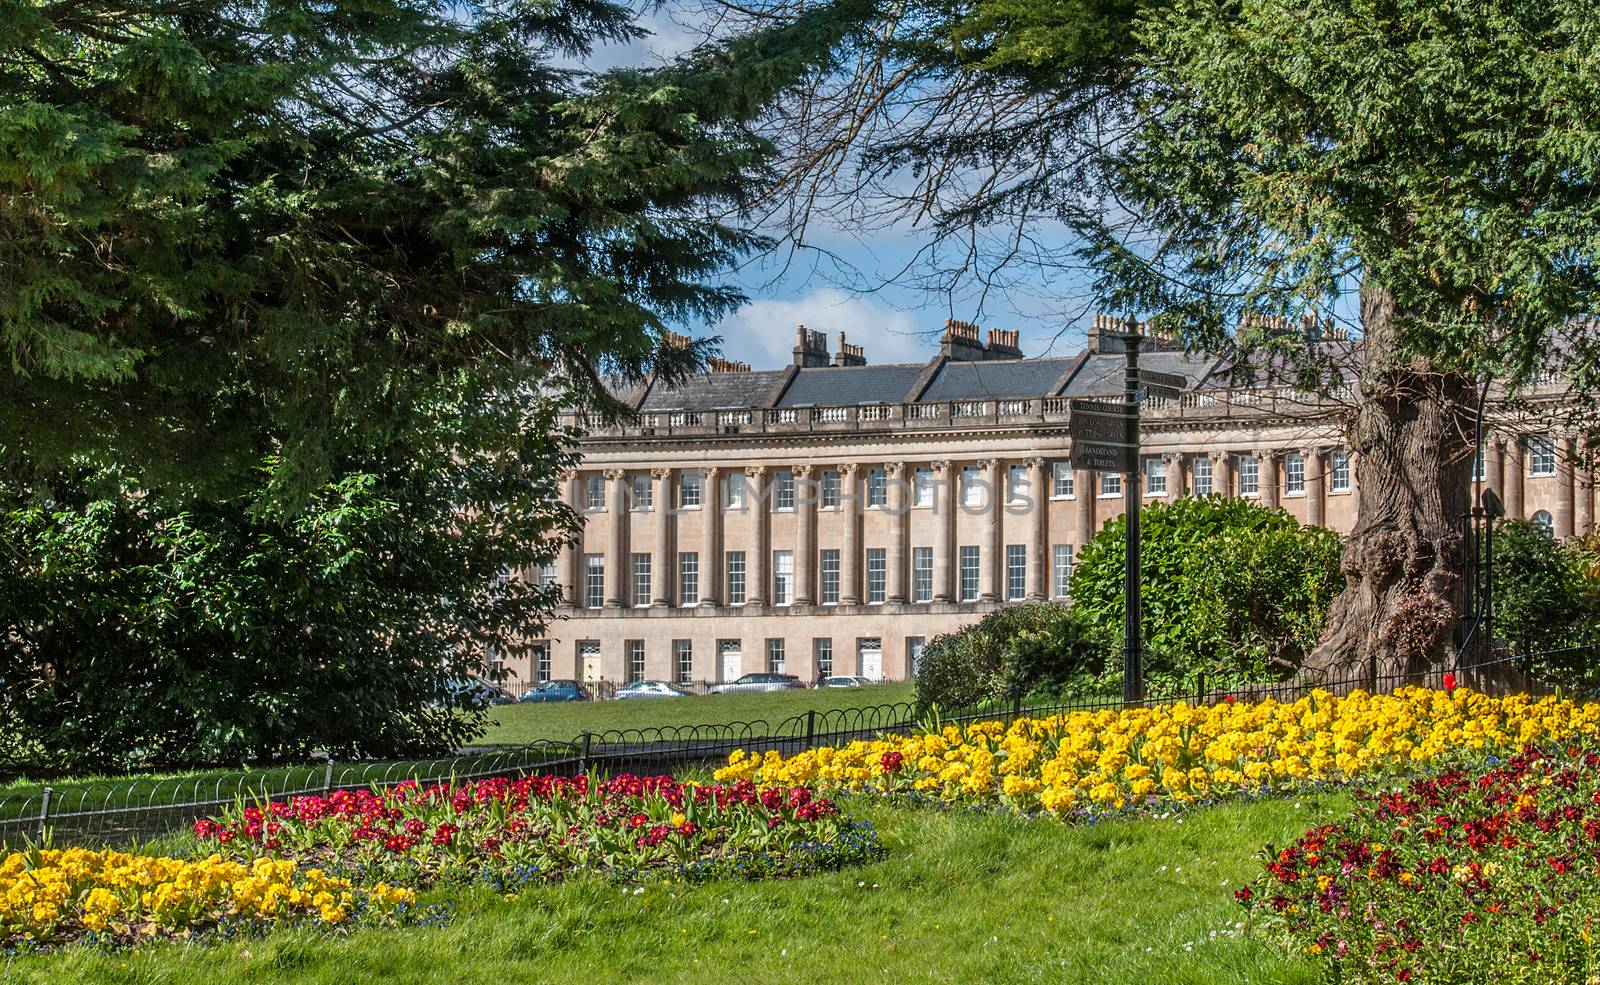 the royal crescent in bath england with flowers showing prominently by sirspread